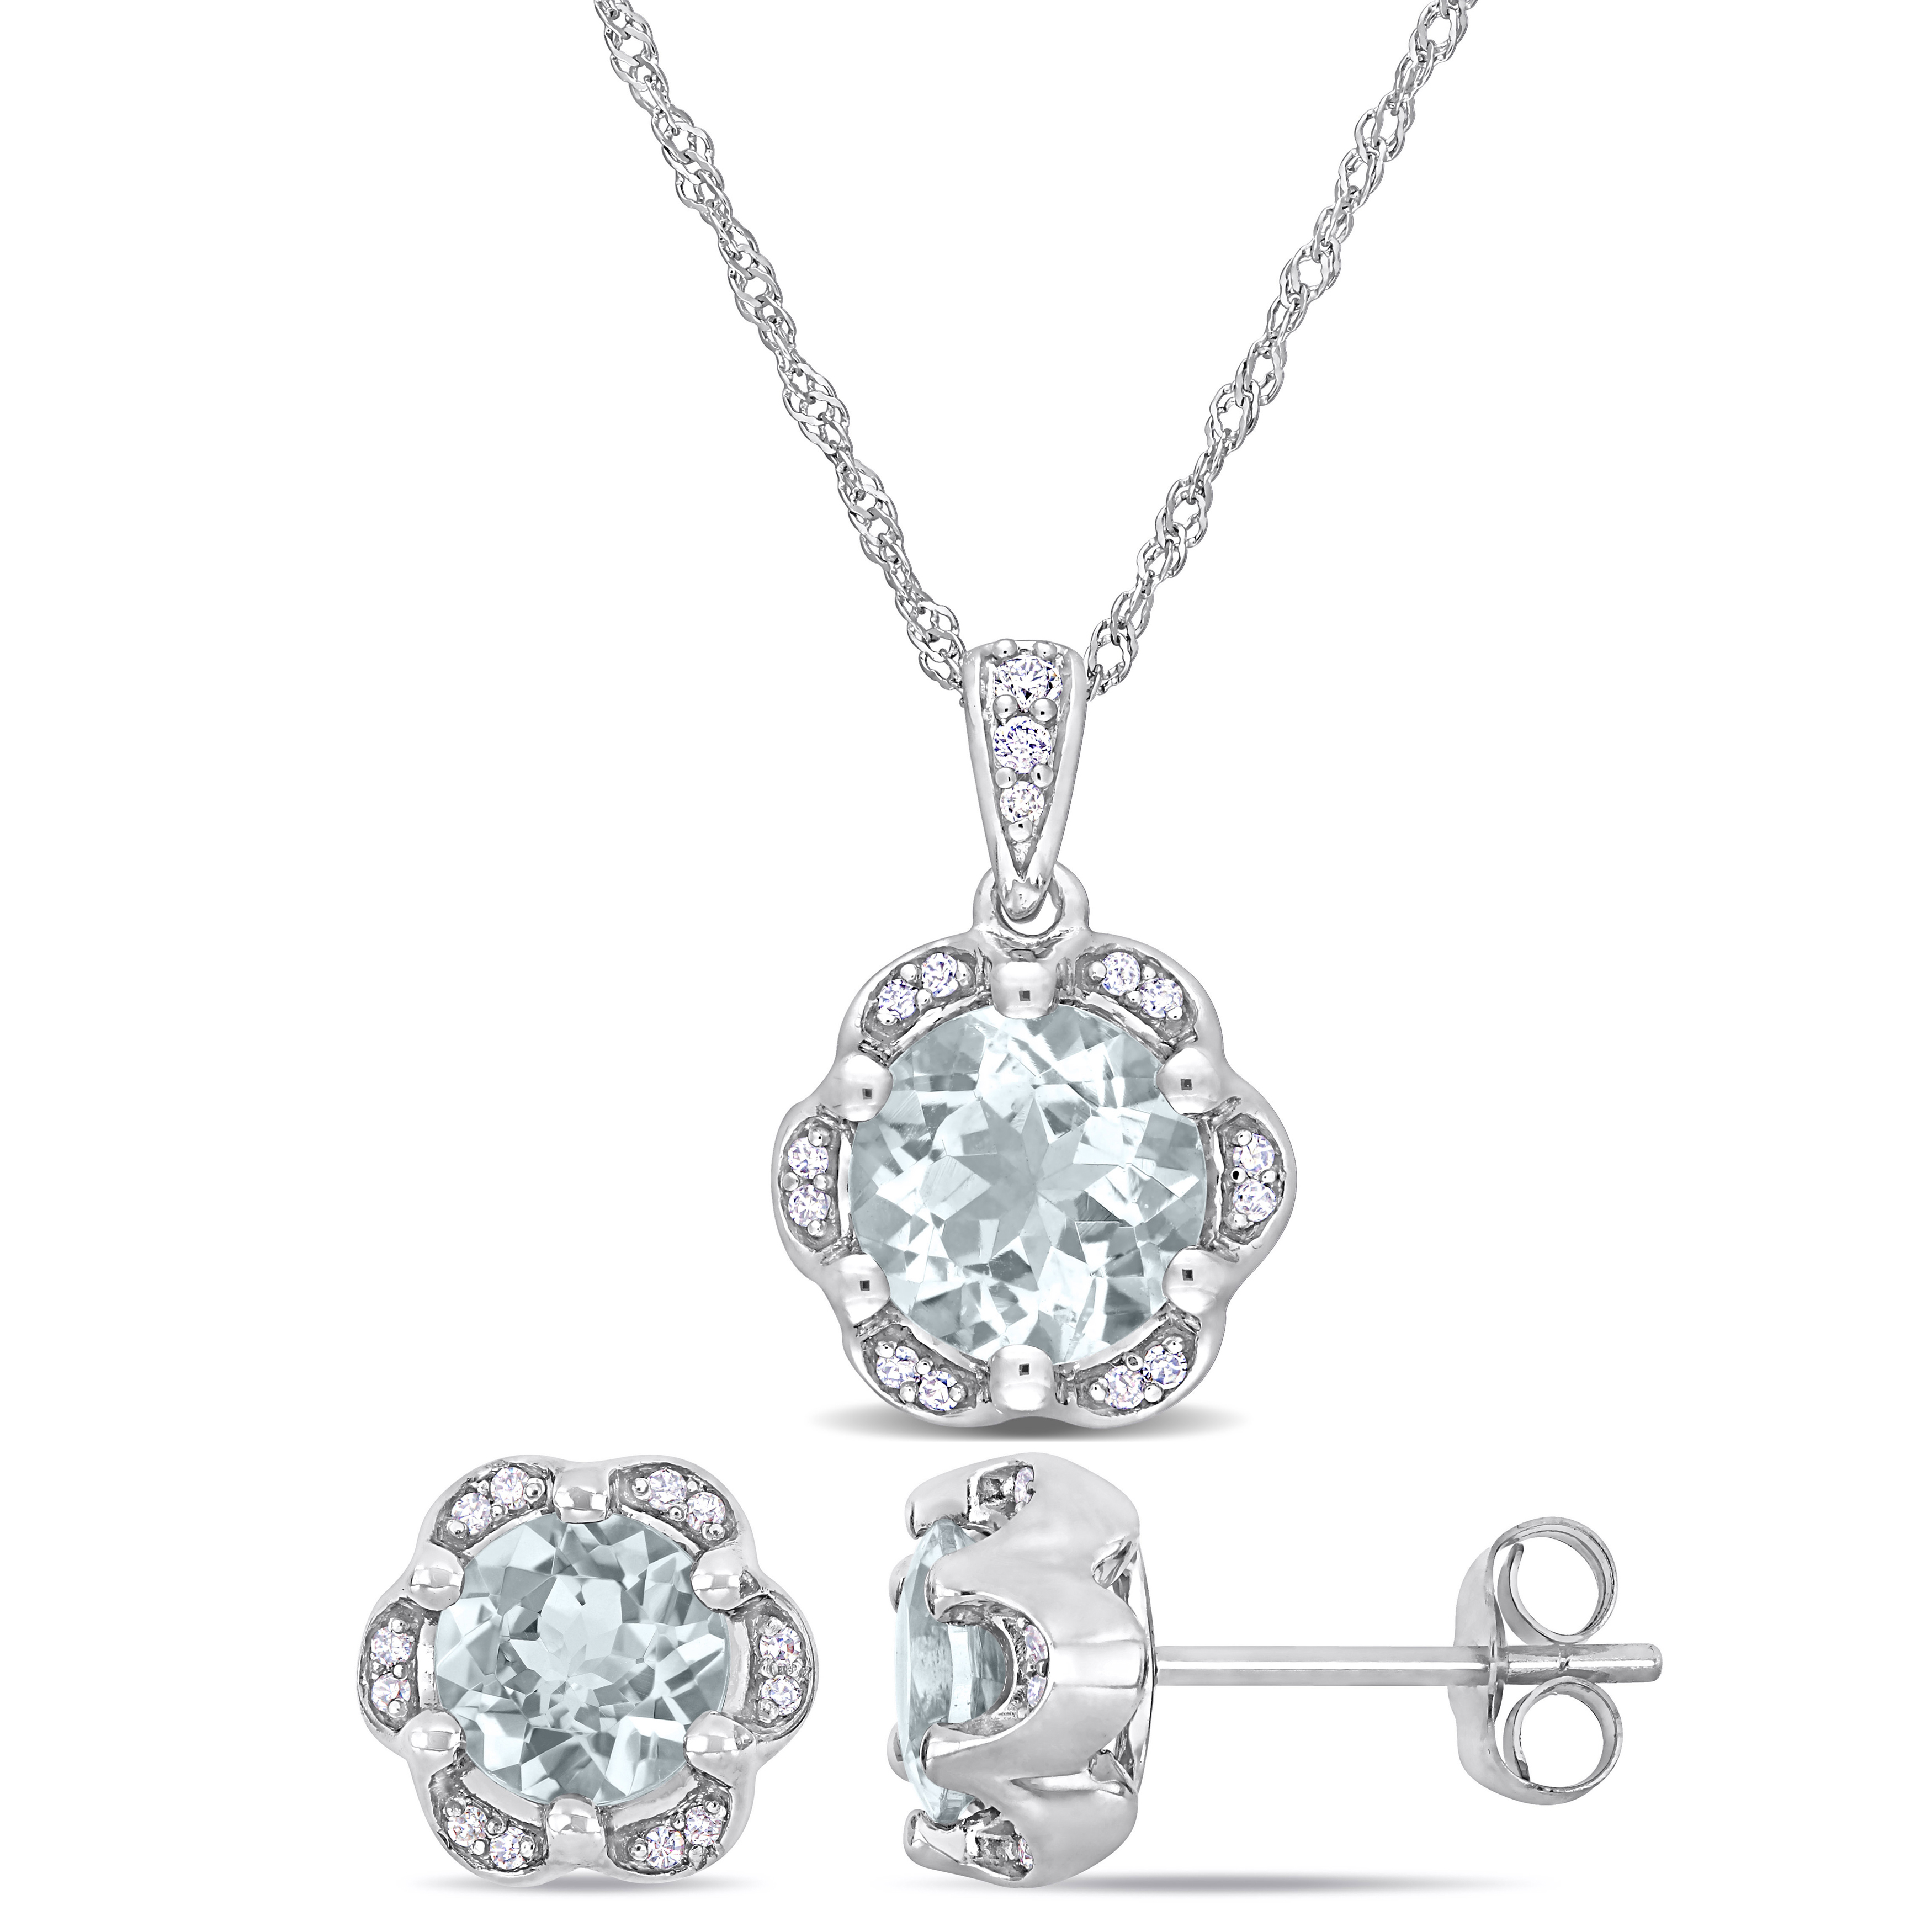 2 1/2 CT TGW Aquamarine and 1/6 Diamond 2-Piece Halo Necklace and Earrings Set in 14k White Gold